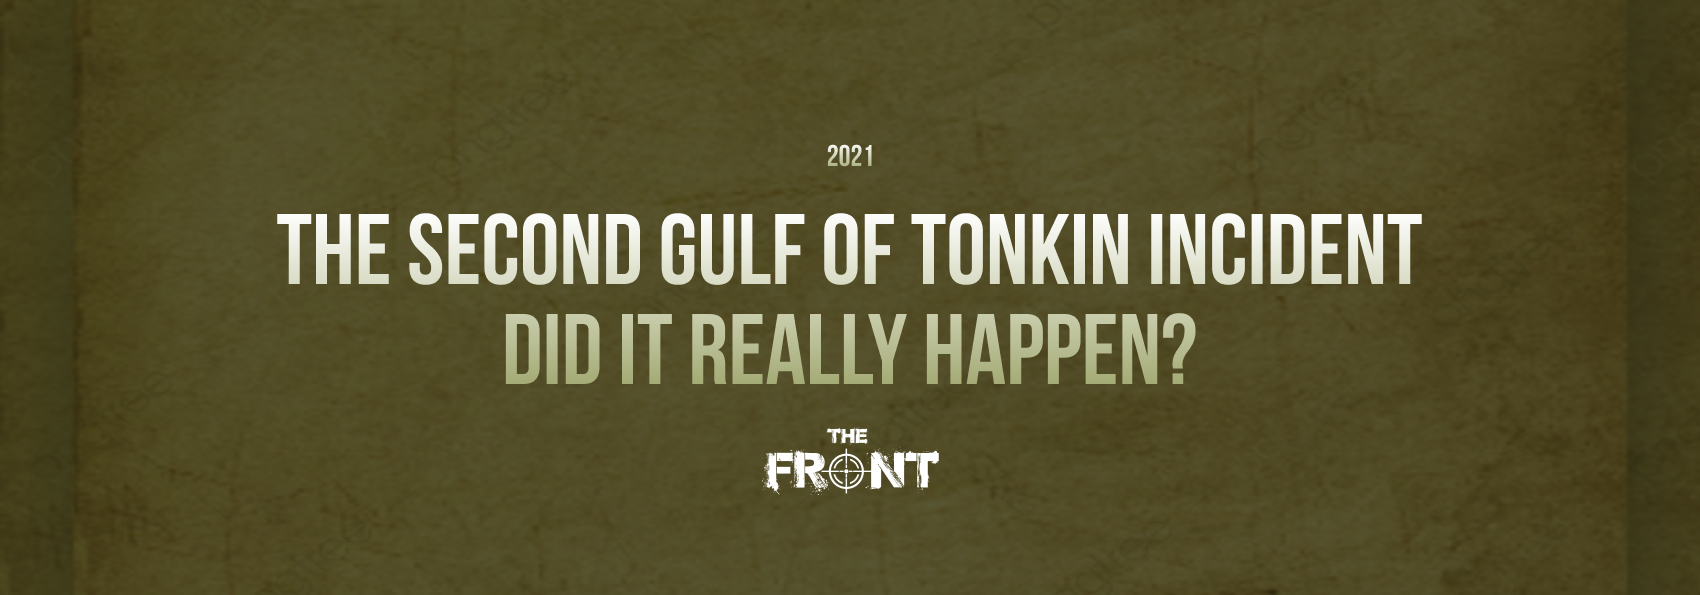 The 2nd Gulf of Tonkin Incident - Did it happen?